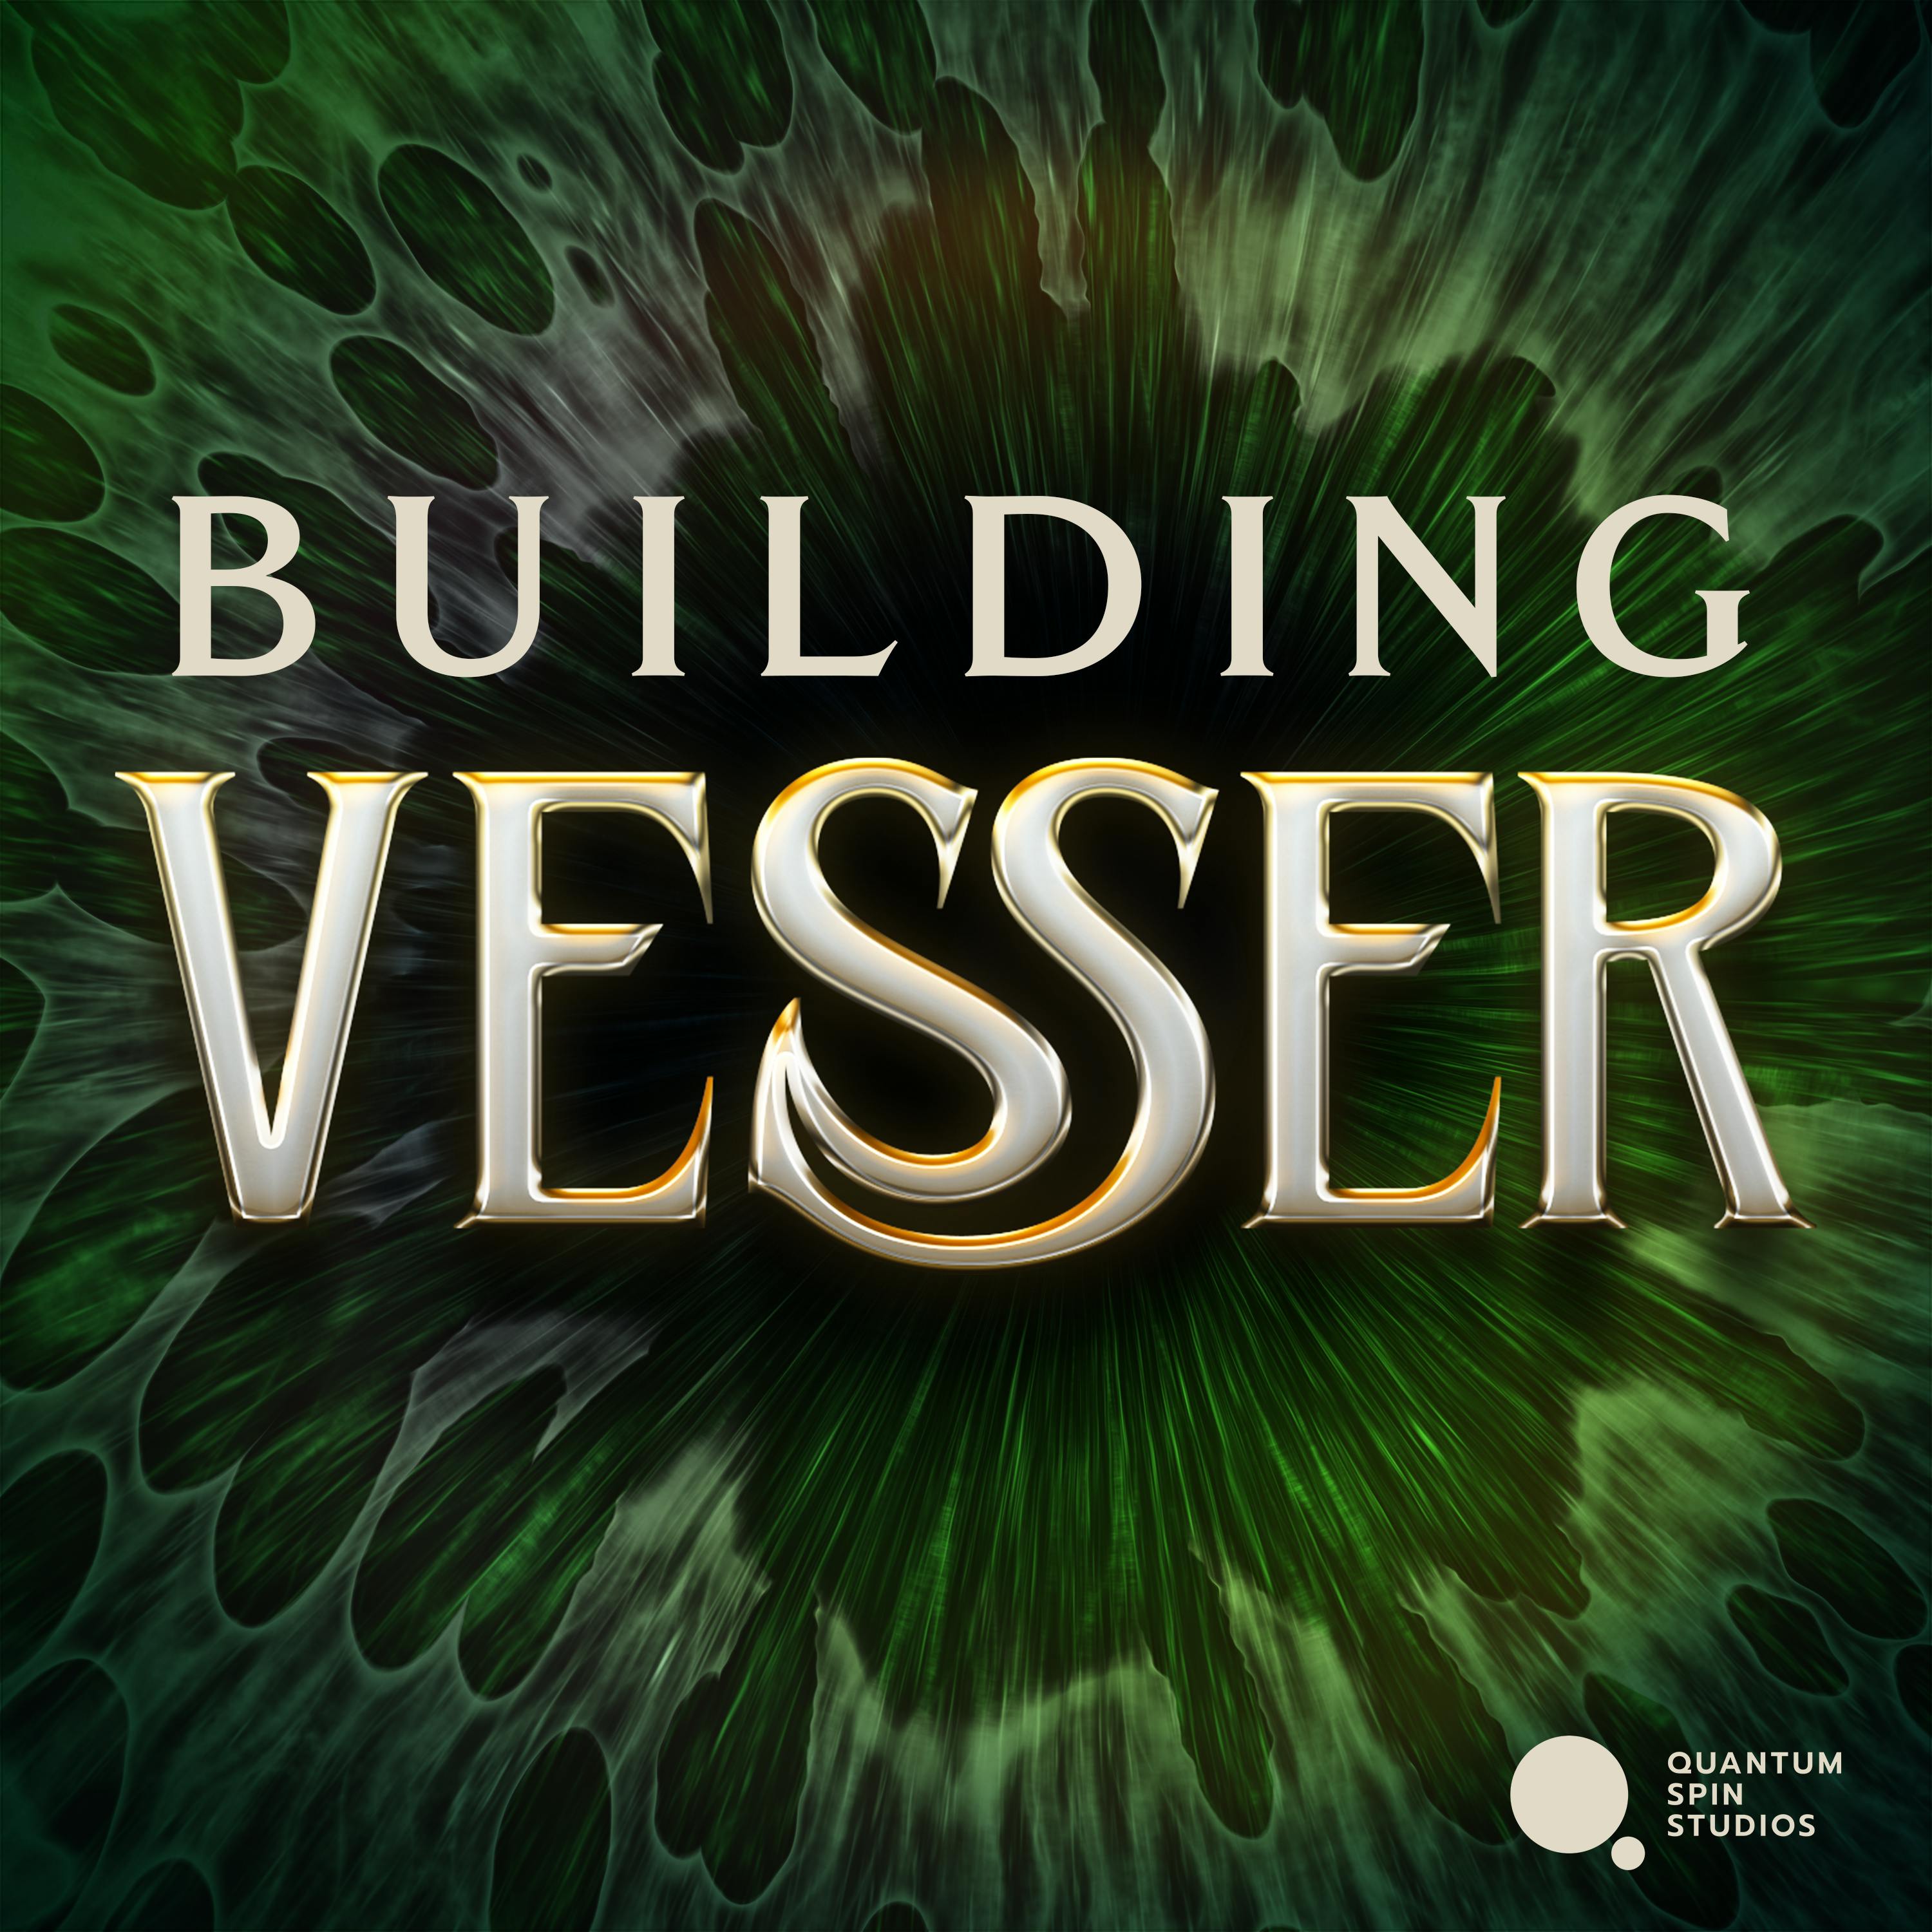 Building Vesser: Baby’s First Magic